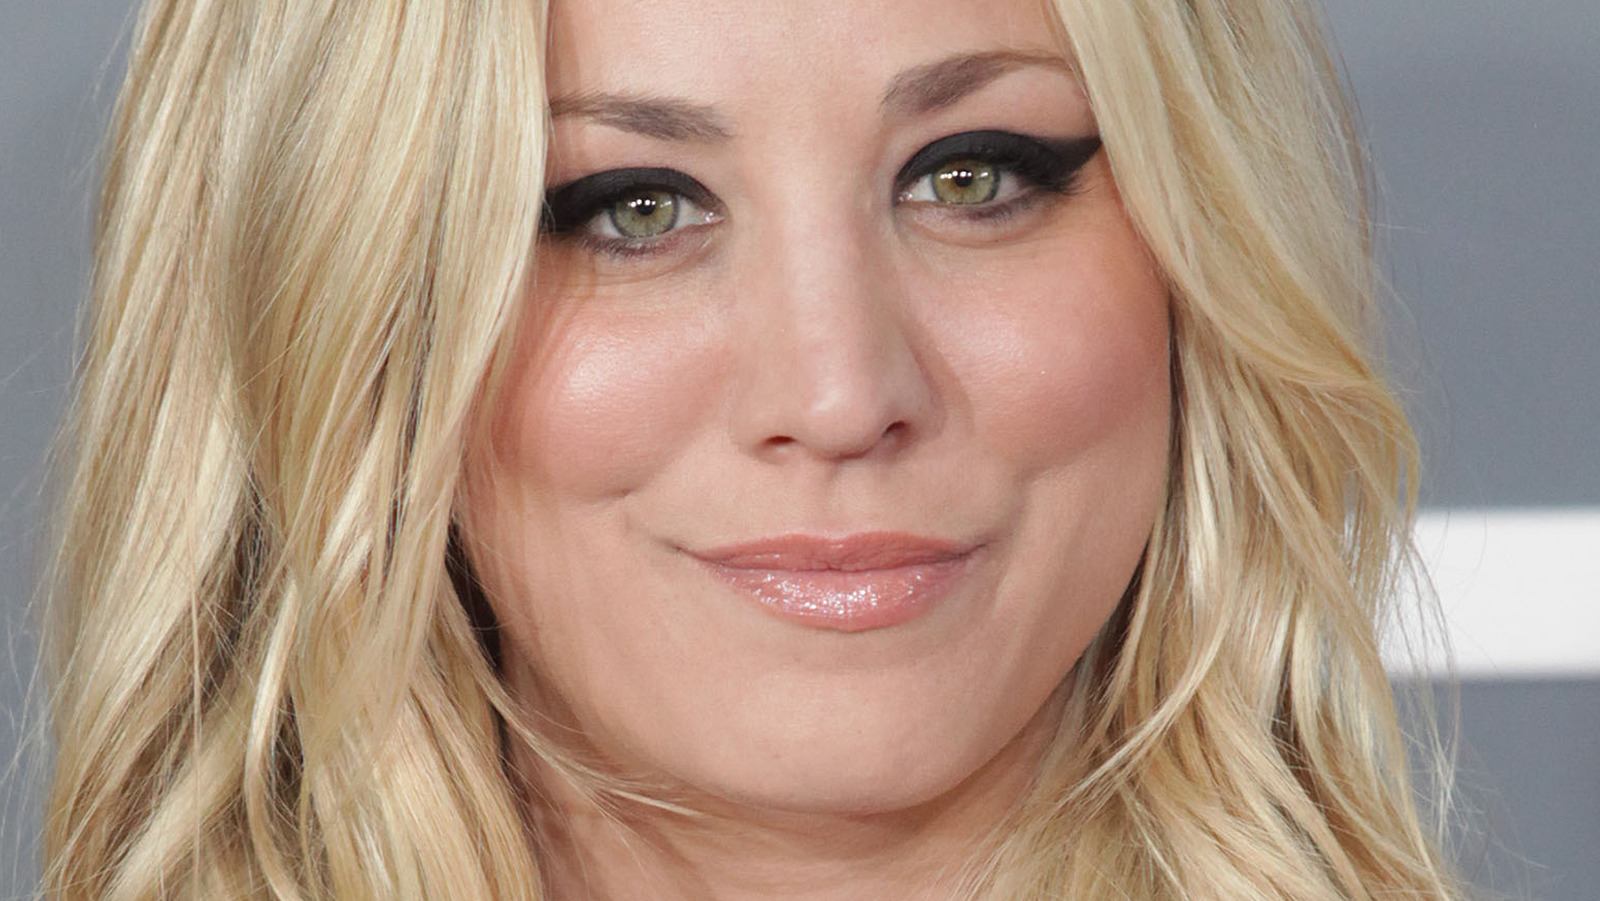 The Only Big Bang Theory Episodes That Kaley Cuoco Will Watch